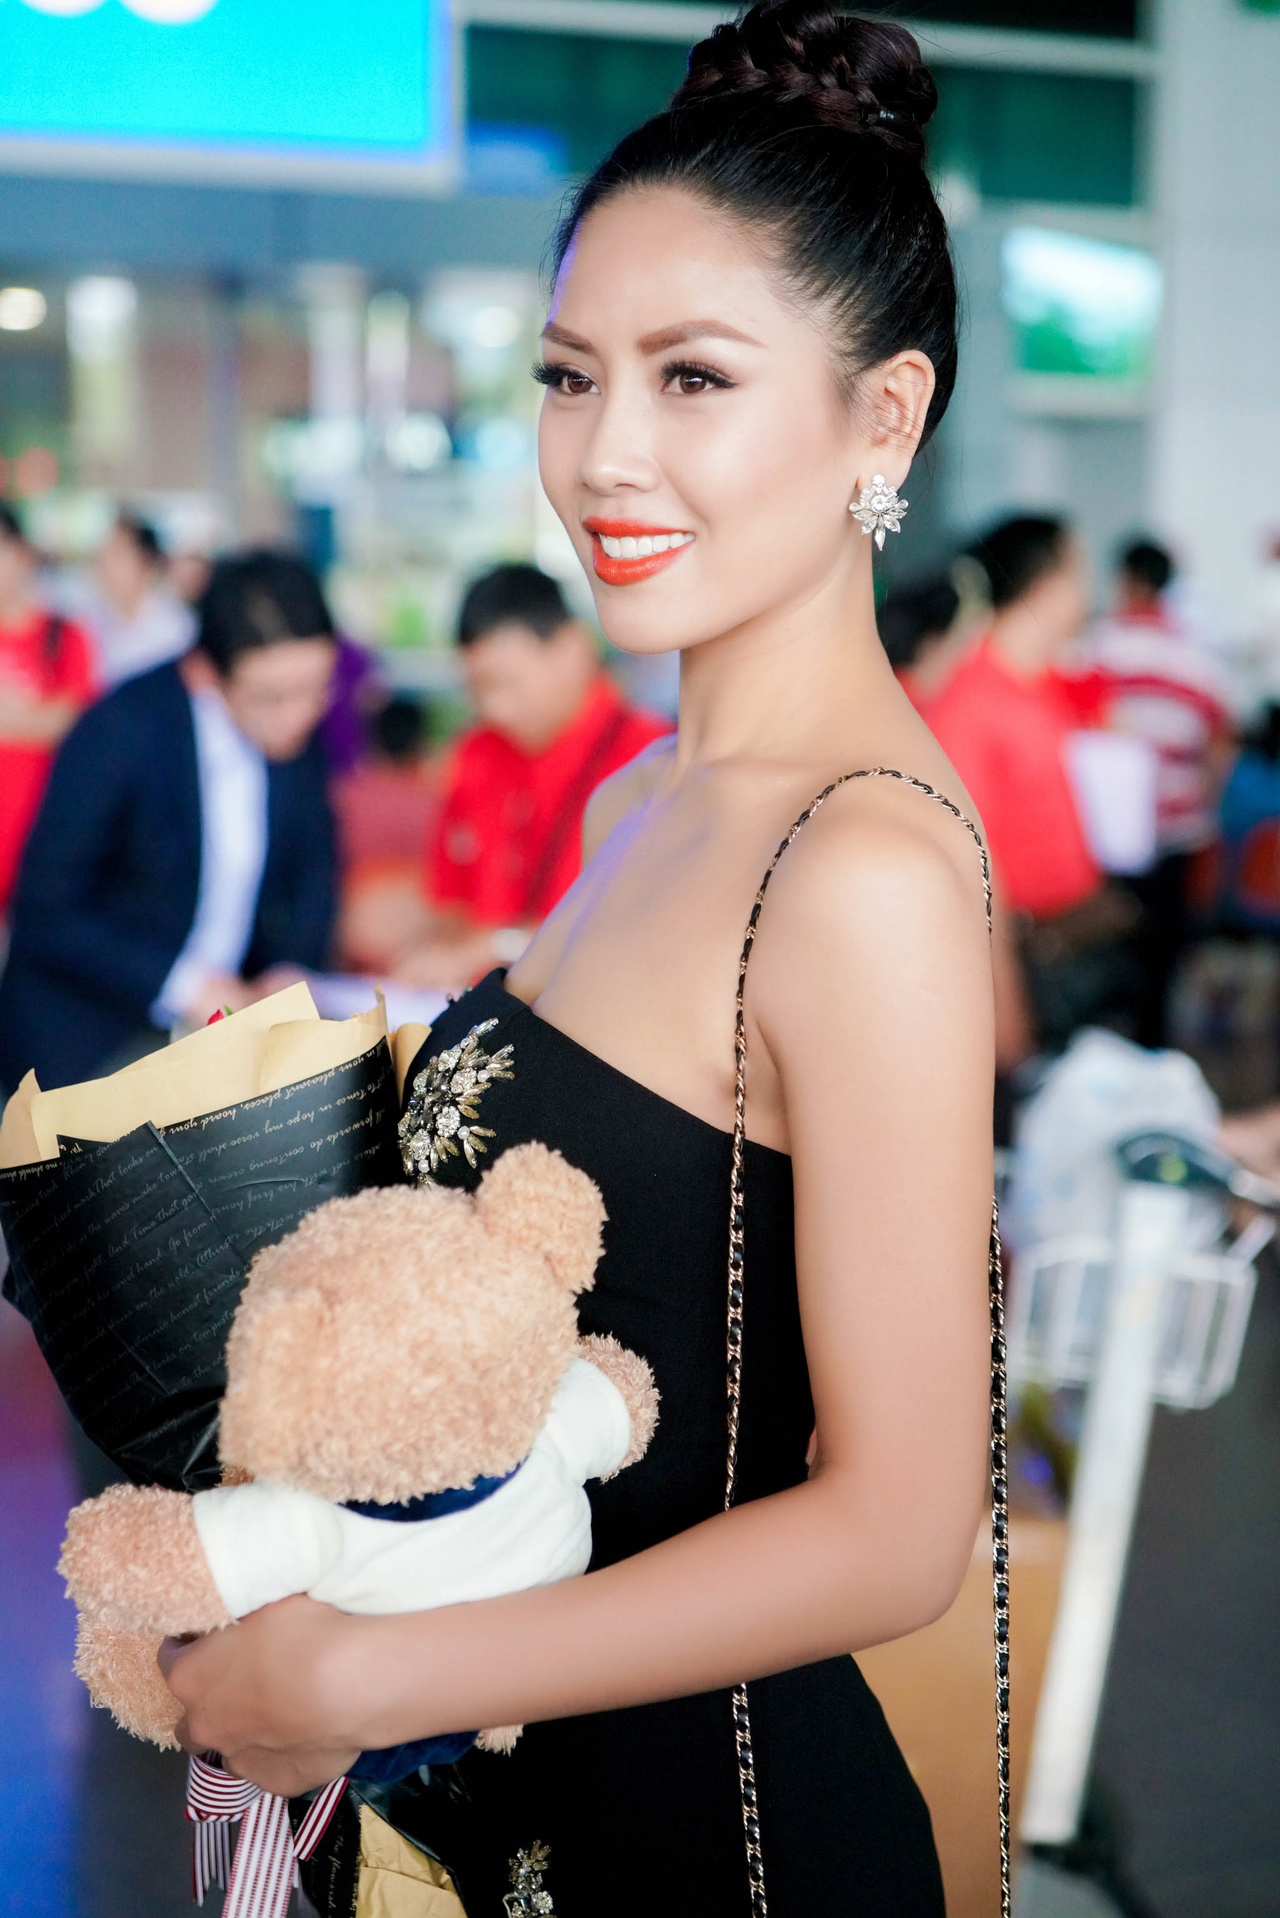 le-hang-thuy-dung-don-nguyen-thi-loan-ve-nuoc-sau-cuoc-thi-miss-universe-2017